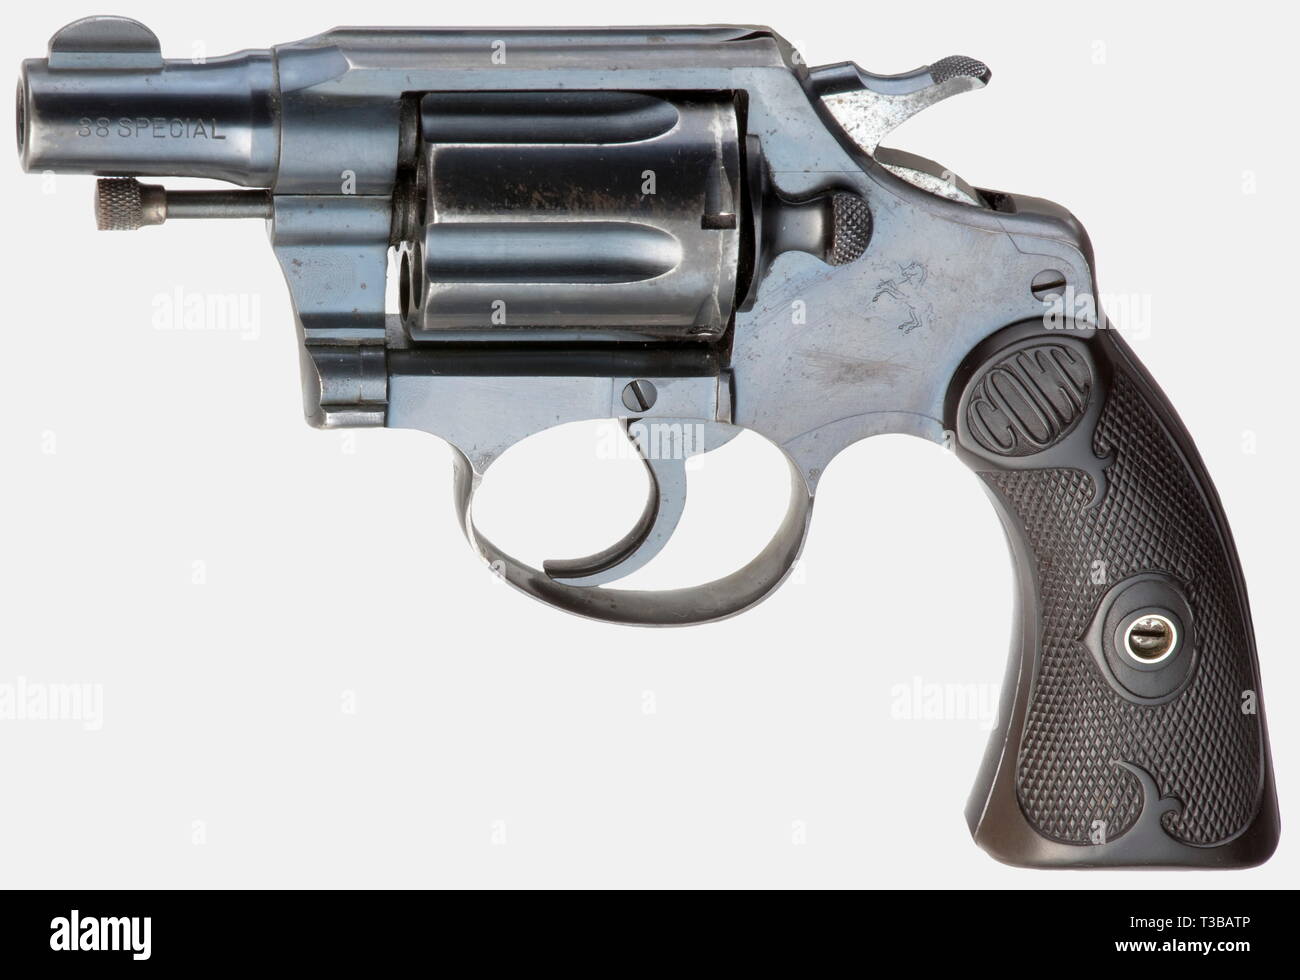 Small arms, revolver, Colt Police Positive, caliber .38, No-Exclusive-Use |  Editorial-Use-Only Stock Photo - Alamy